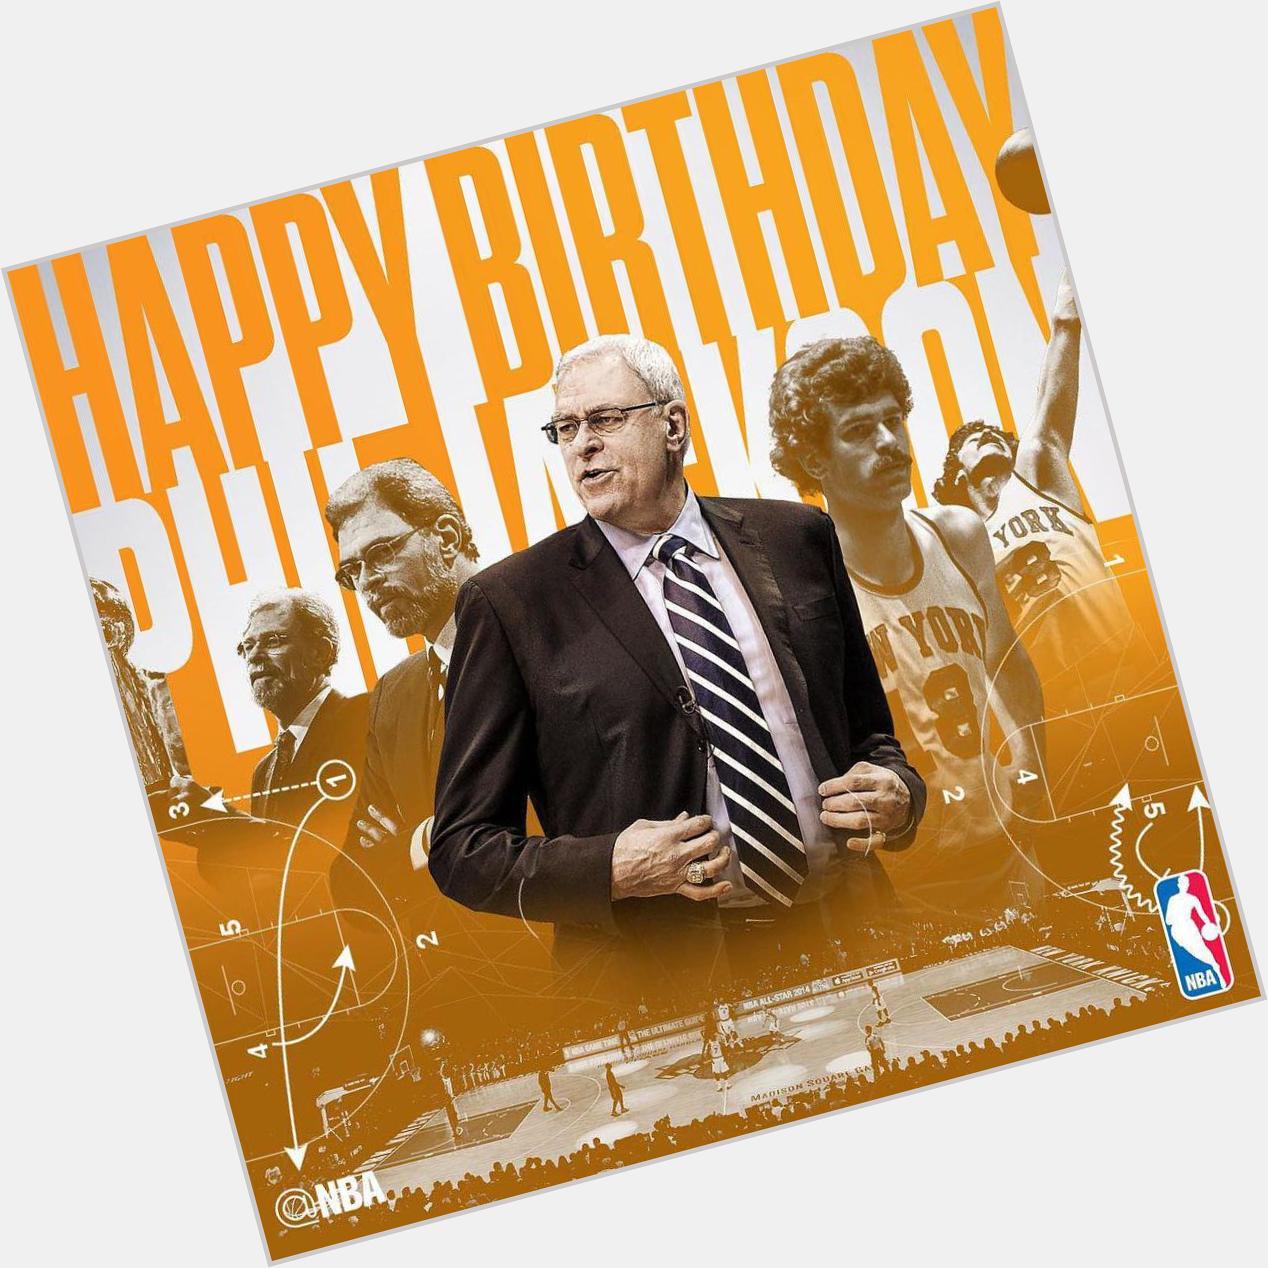 NBA Join us in wishing 13x champ PHIL JACKSON a HAPPY 70th BIRTHDAY!  